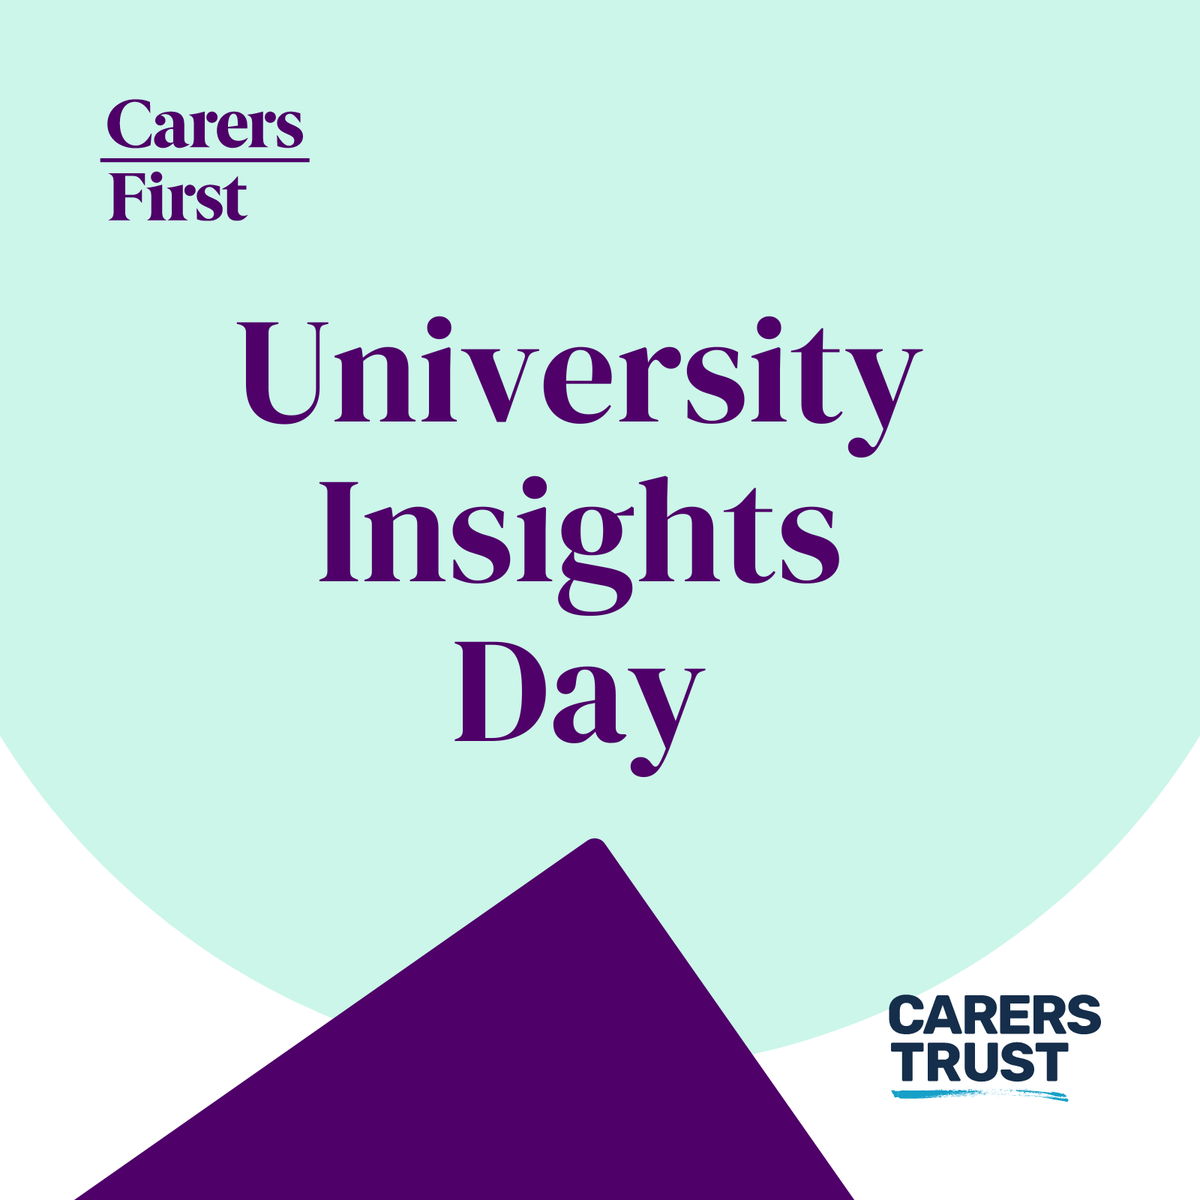 If you are a #youngadultcarer aged between 16-23, we have an opportunity for you to attend the University of London for an insights day, with travel costs included.

Contact us at LincsYacs@carersfirst.org.uk to register your interest and we will be in touch.

#Supportingcarers